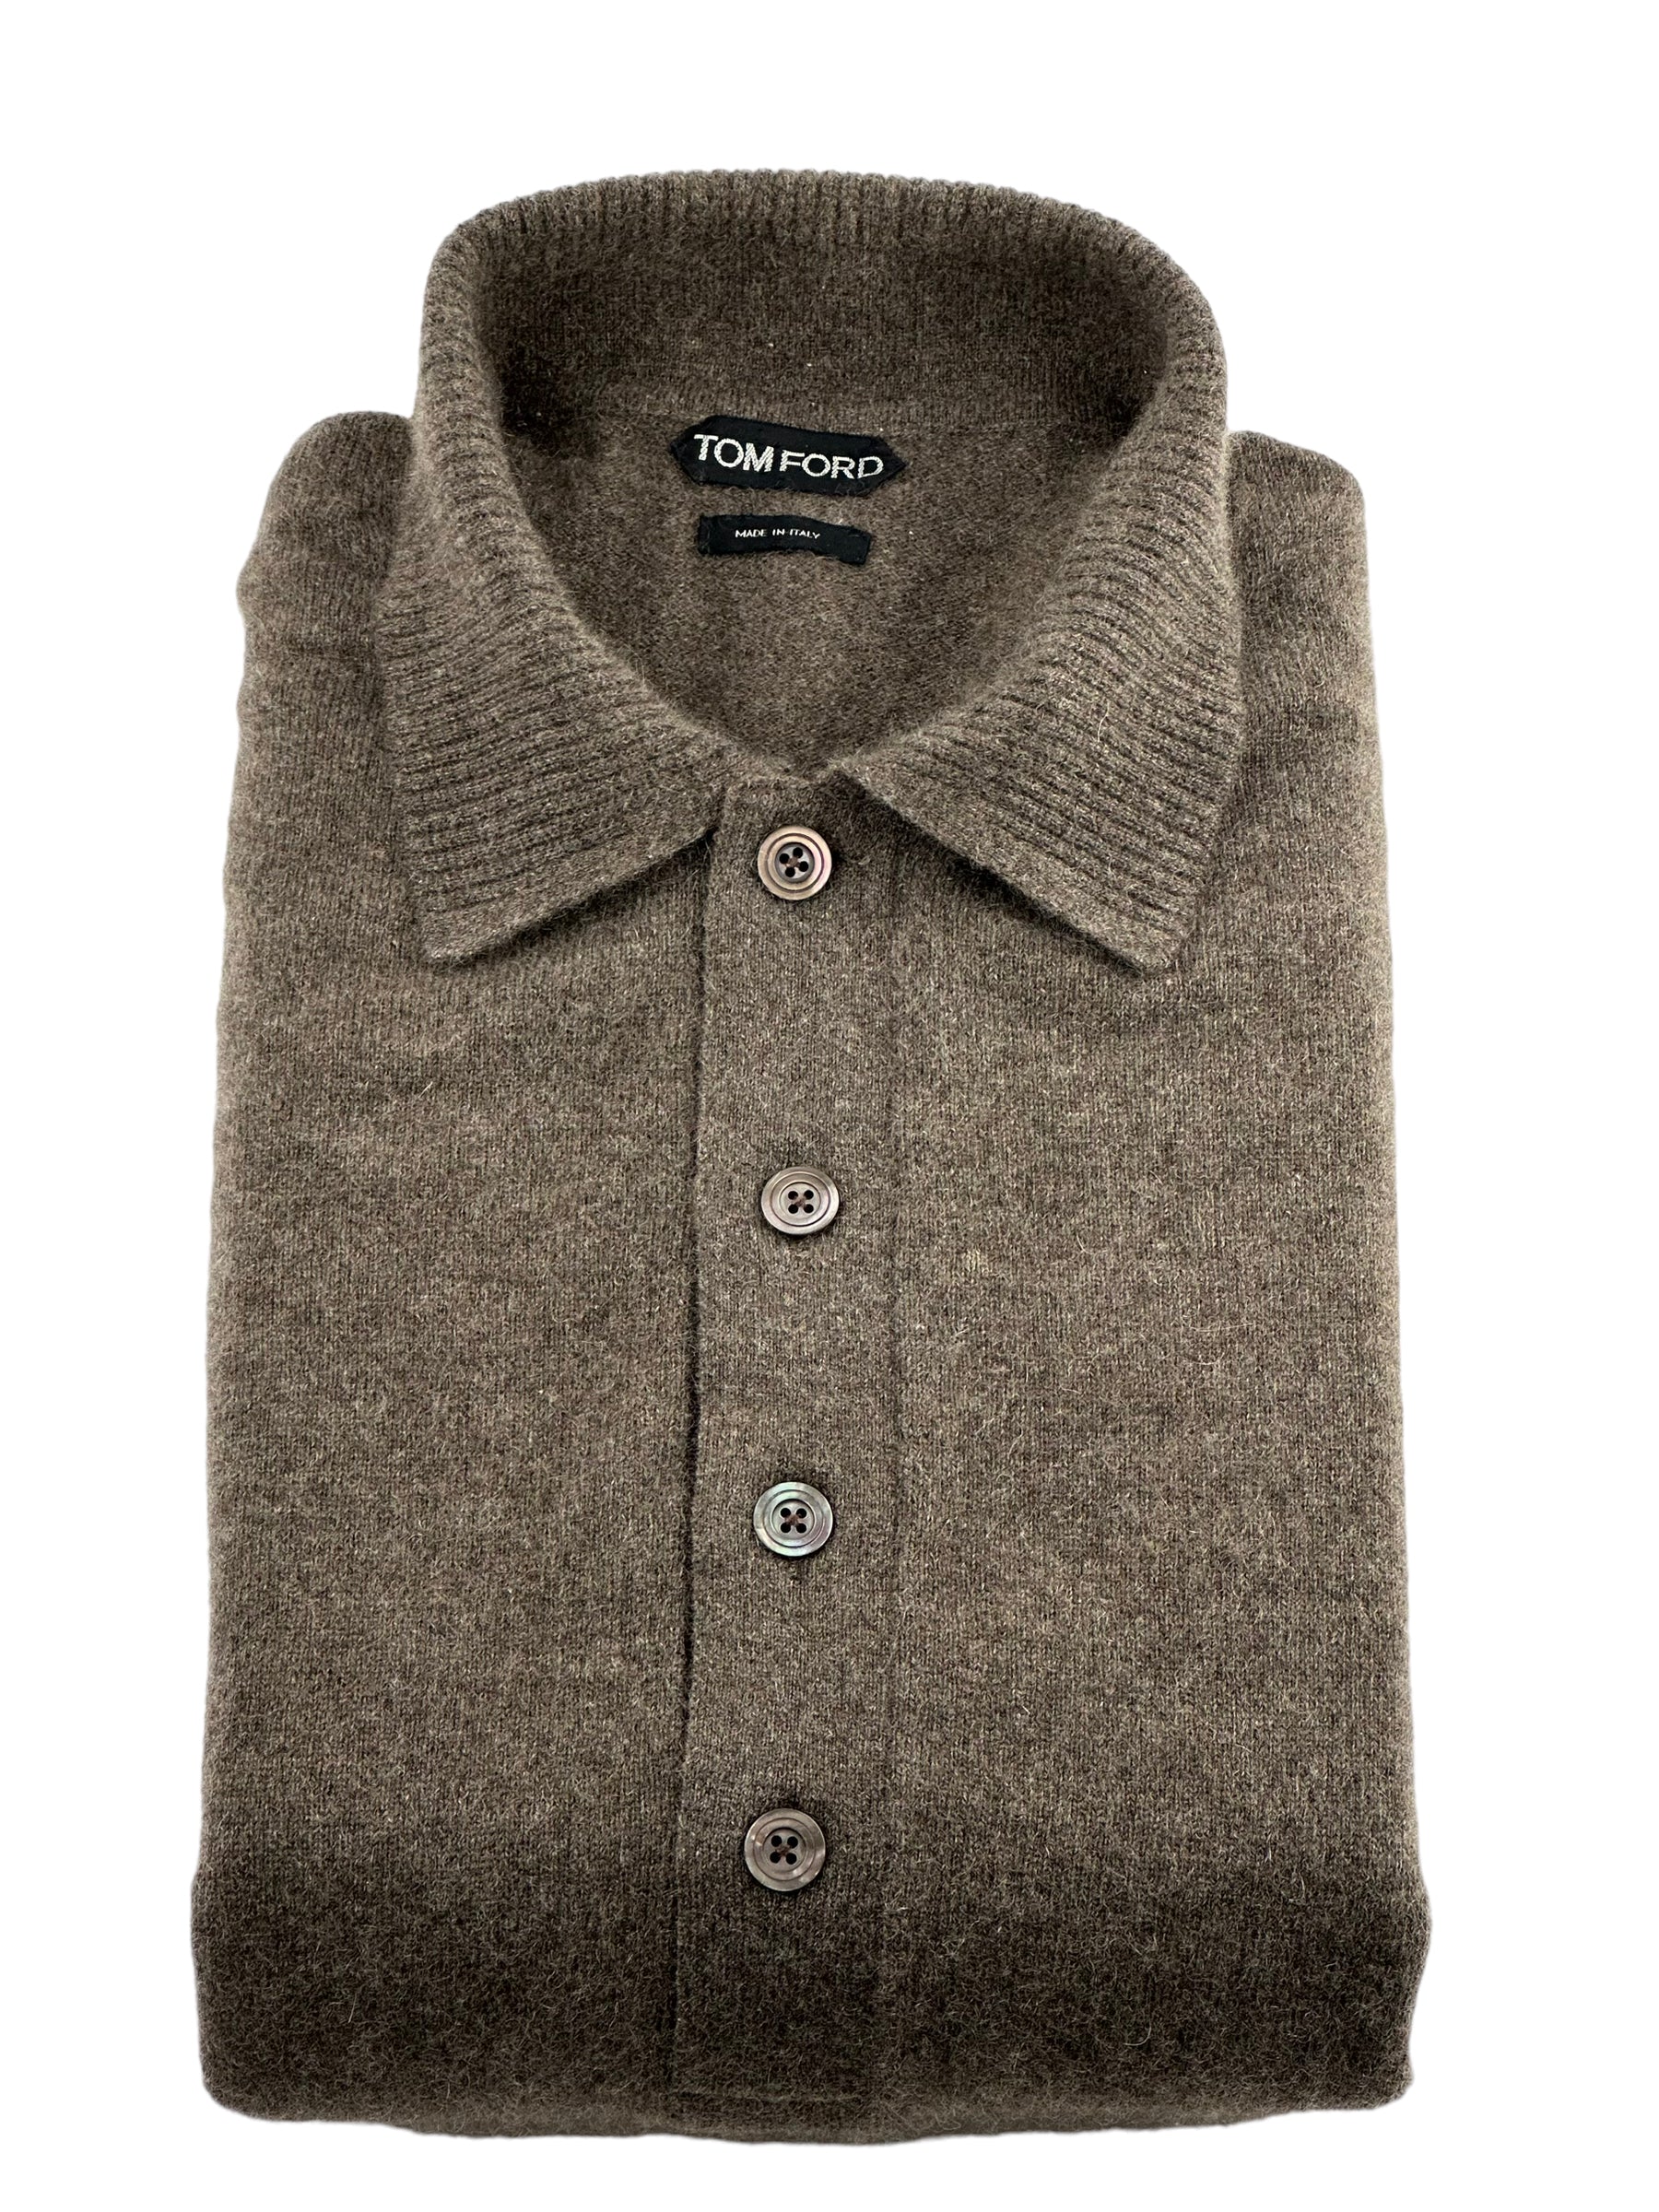 Tom Ford Brown Cashmere Long-Sleeve Polo